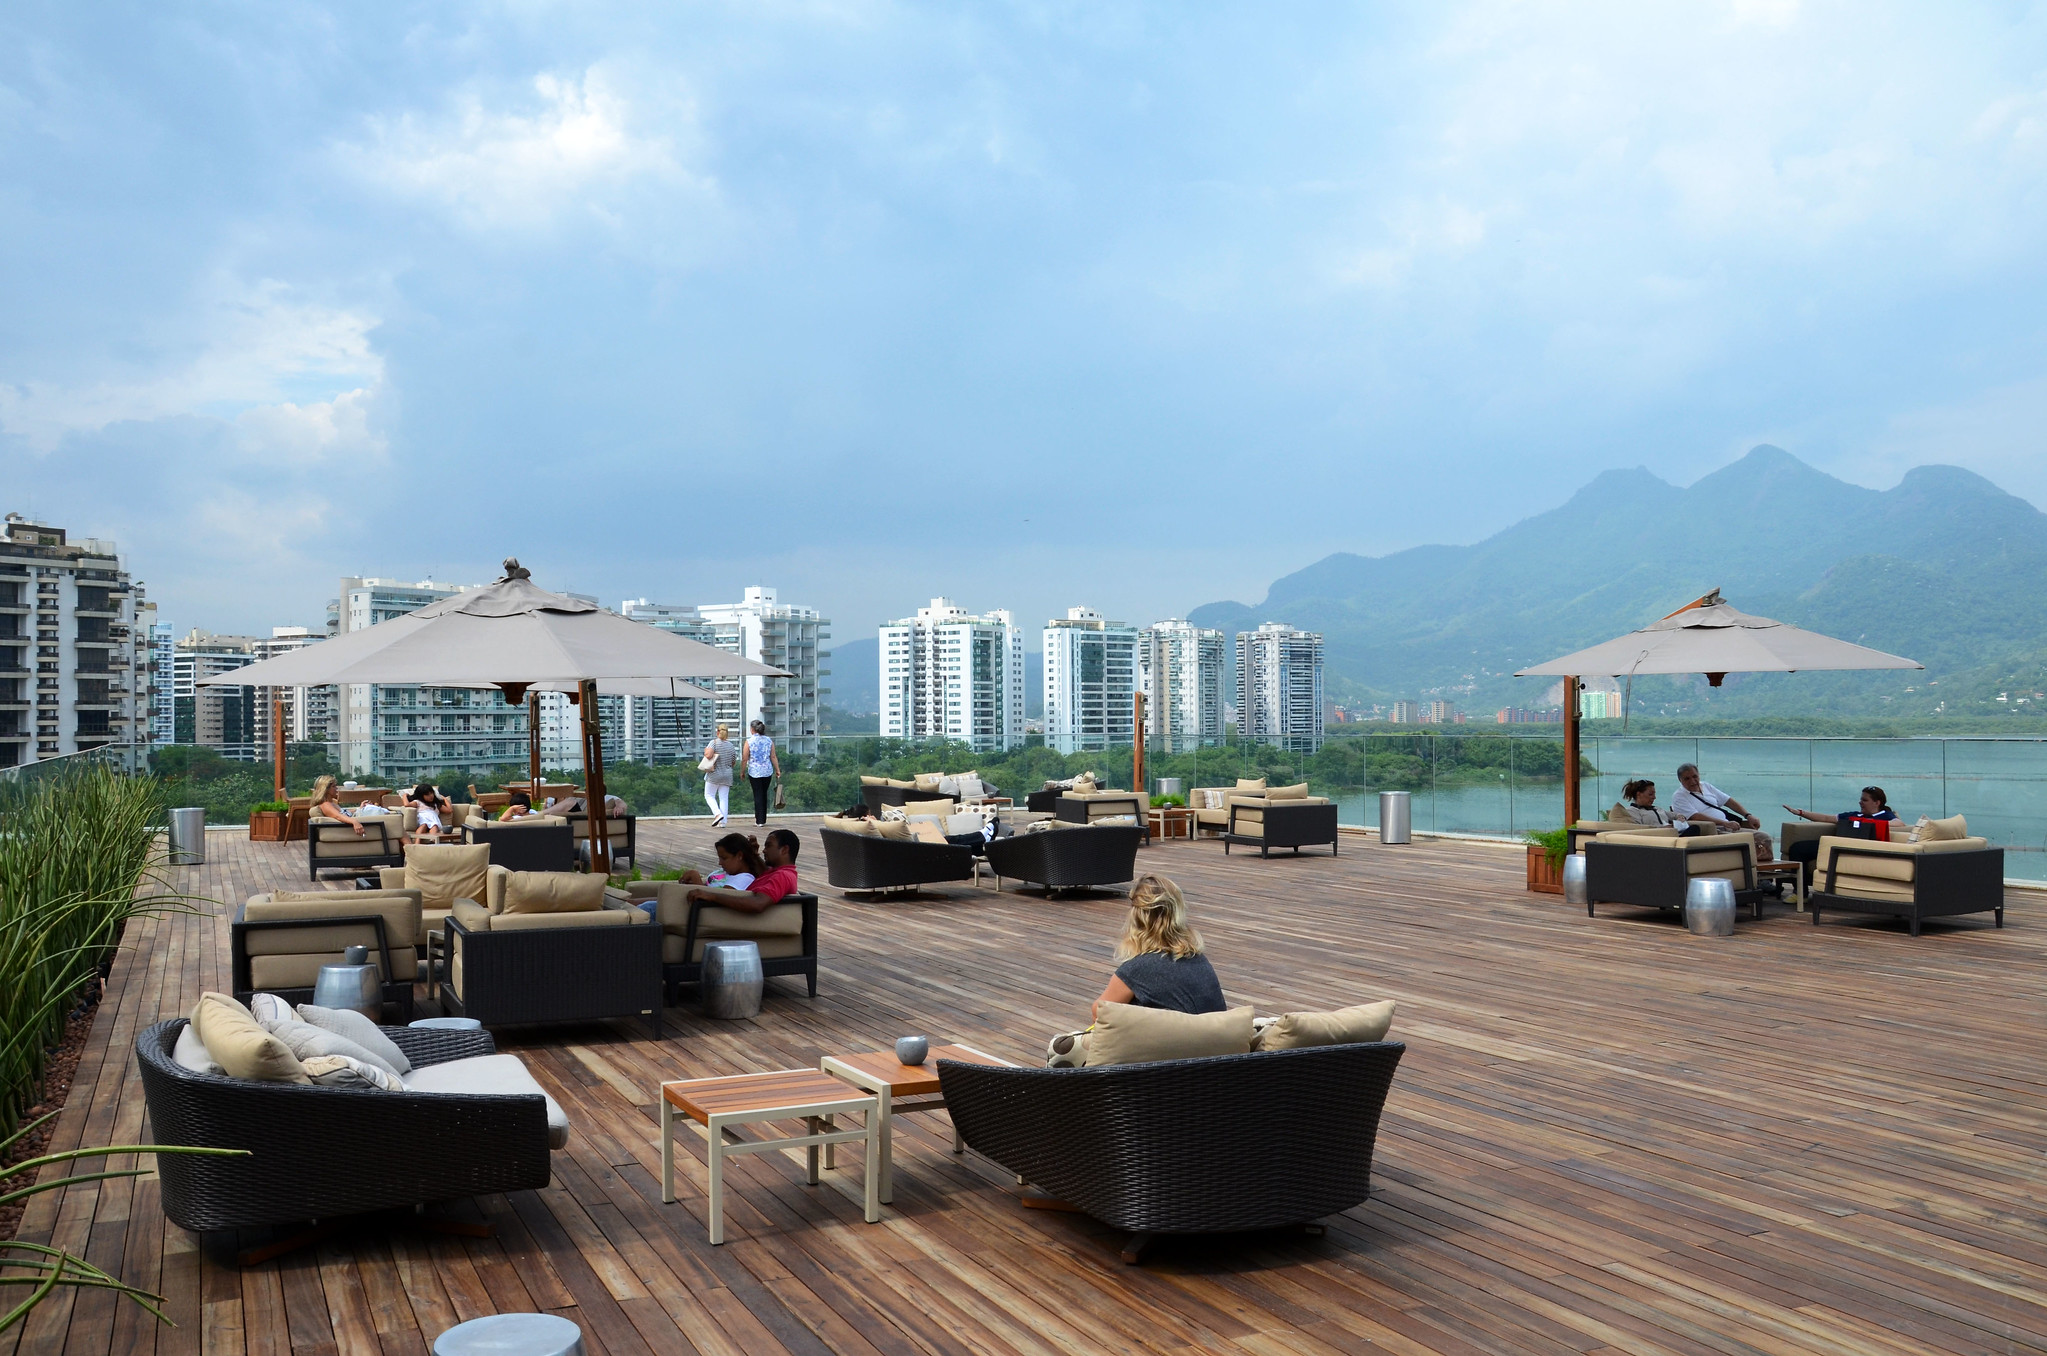 A rooftop relaxation area. Wood-panel flooring stretches the length of the rooftop, which is surrounded by a glass barrier. Dotted around the rooftop are coffee tables, low basket-weave lounge chairs, and sun umbrellas. From the rooftop can be seen multi-story buildings, forested mountains and Lake Tijuca. Image: Alexandre Macieira/Riotur